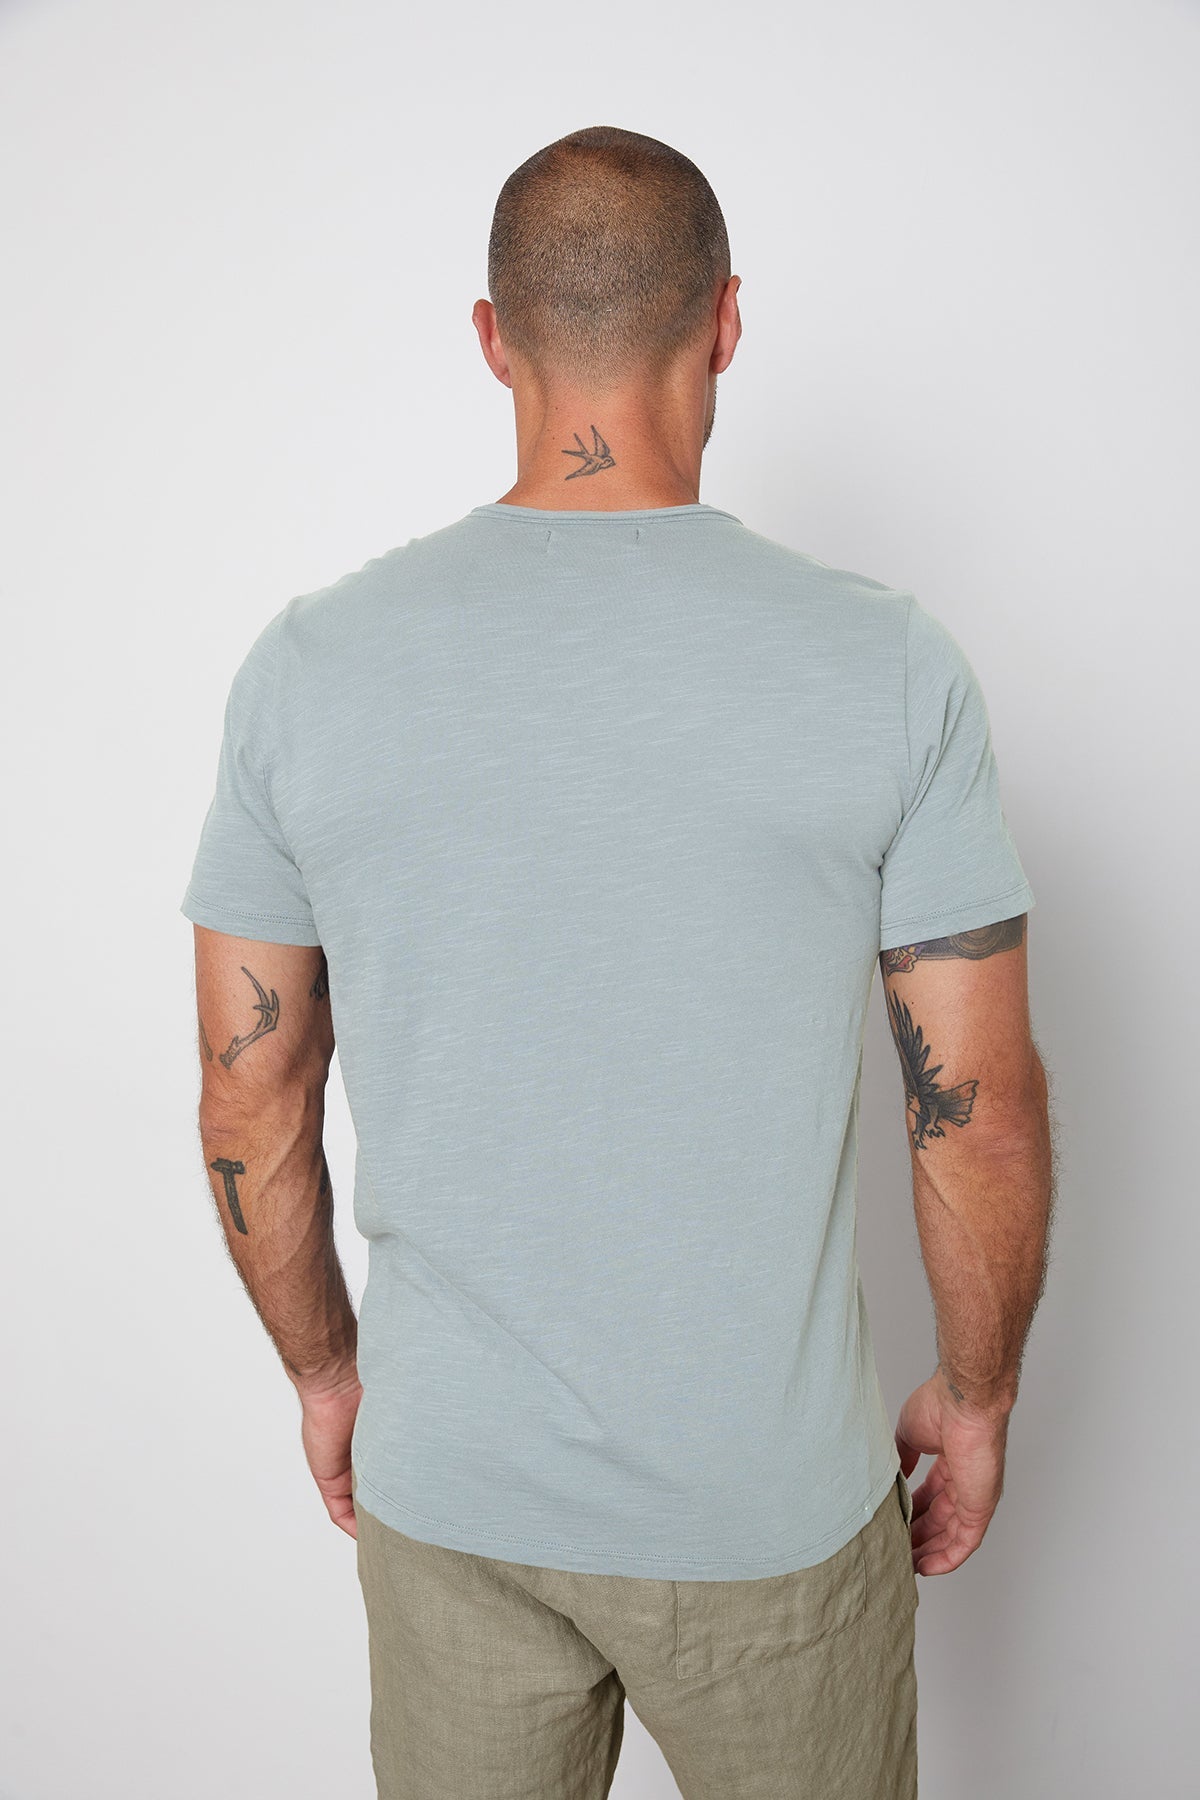   Chad Raw Edge Cotton Slub Pocket Tee in riptide with Jonathan shorts in olive back 